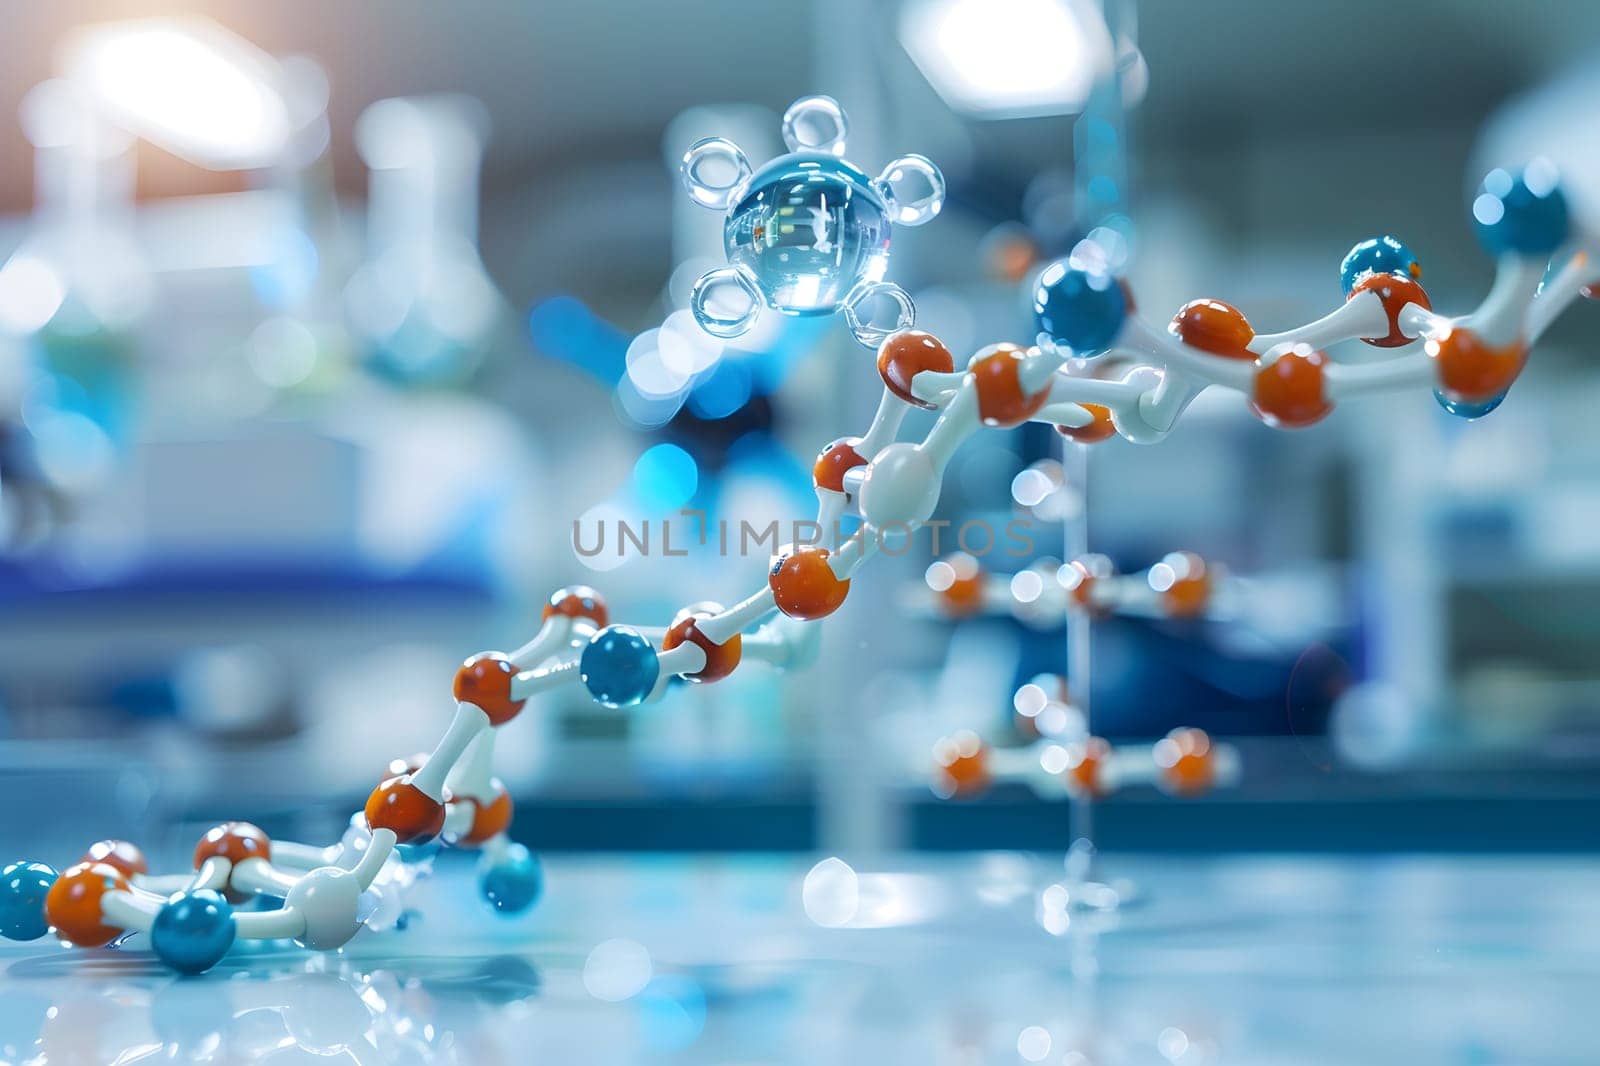 Close up of a water molecule model on a glass table in a laboratory by Nadtochiy